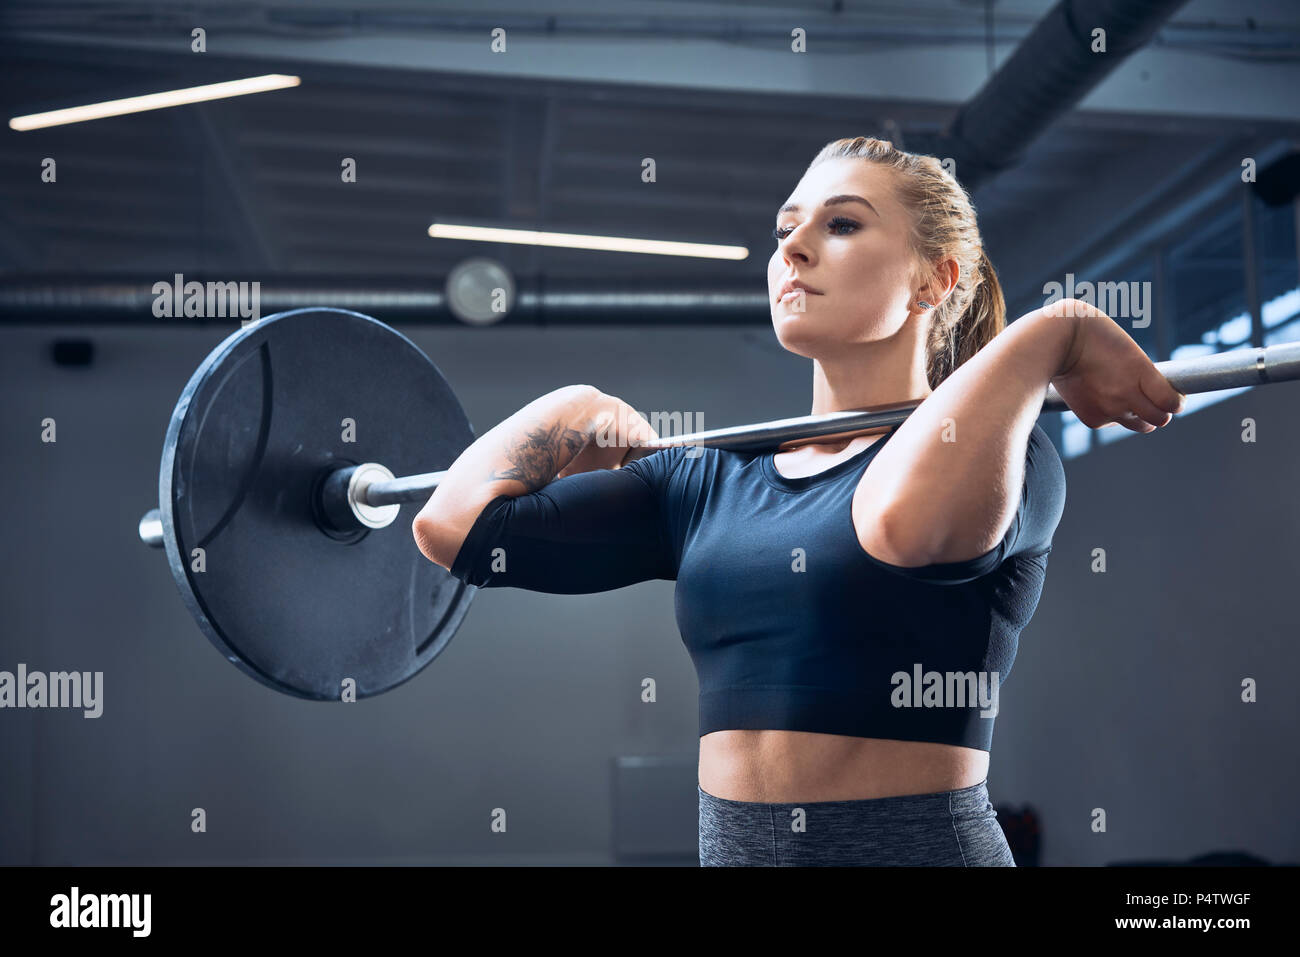 Woman doing push press exercise at gym Stock Photo